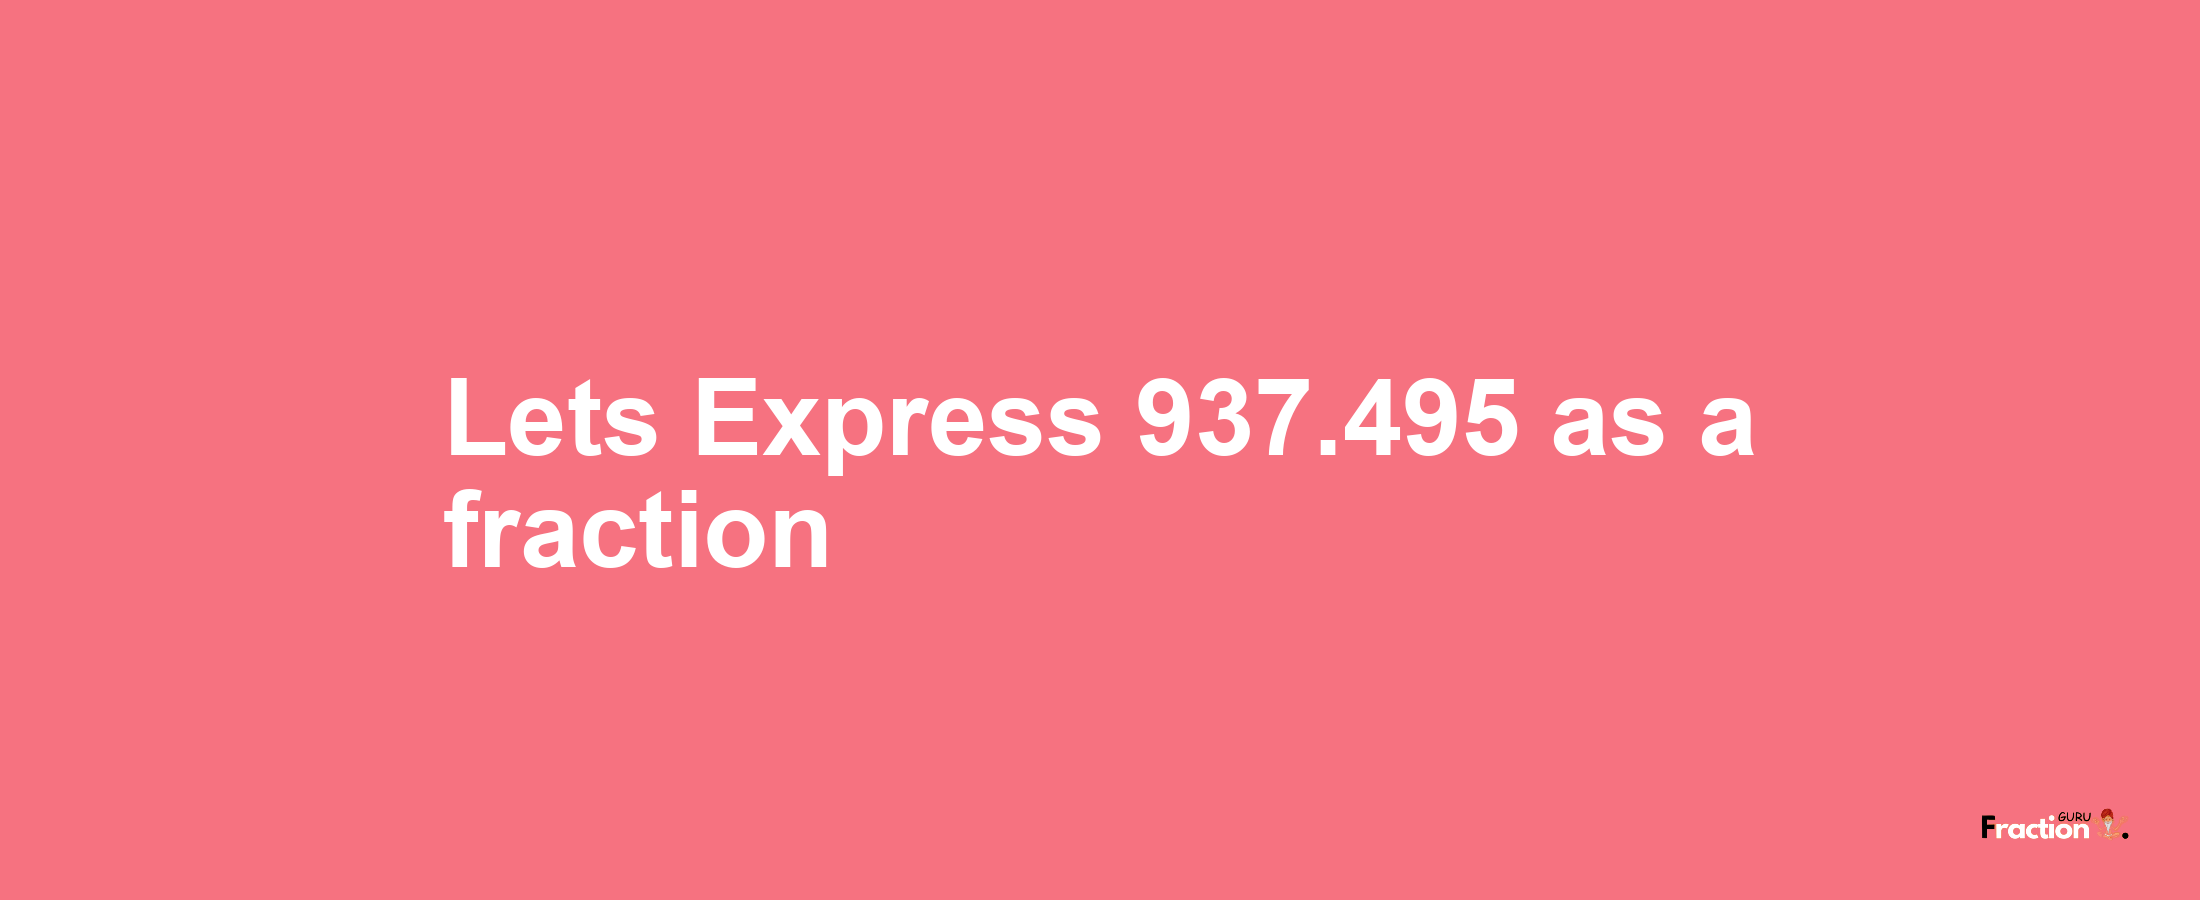 Lets Express 937.495 as afraction